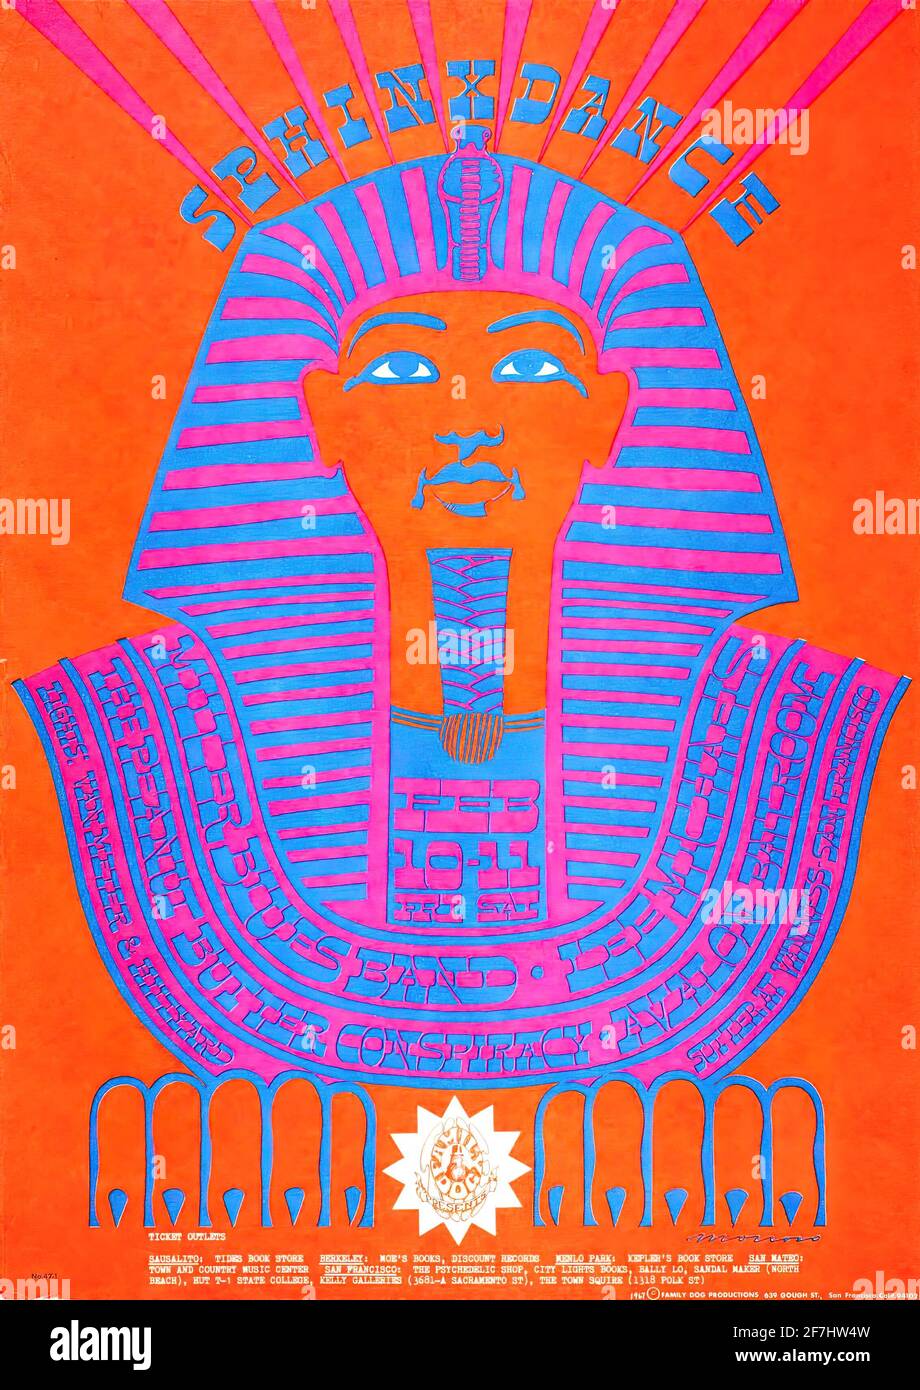 A vintage psychedelic music poster for Sphinxdance Stock Photo